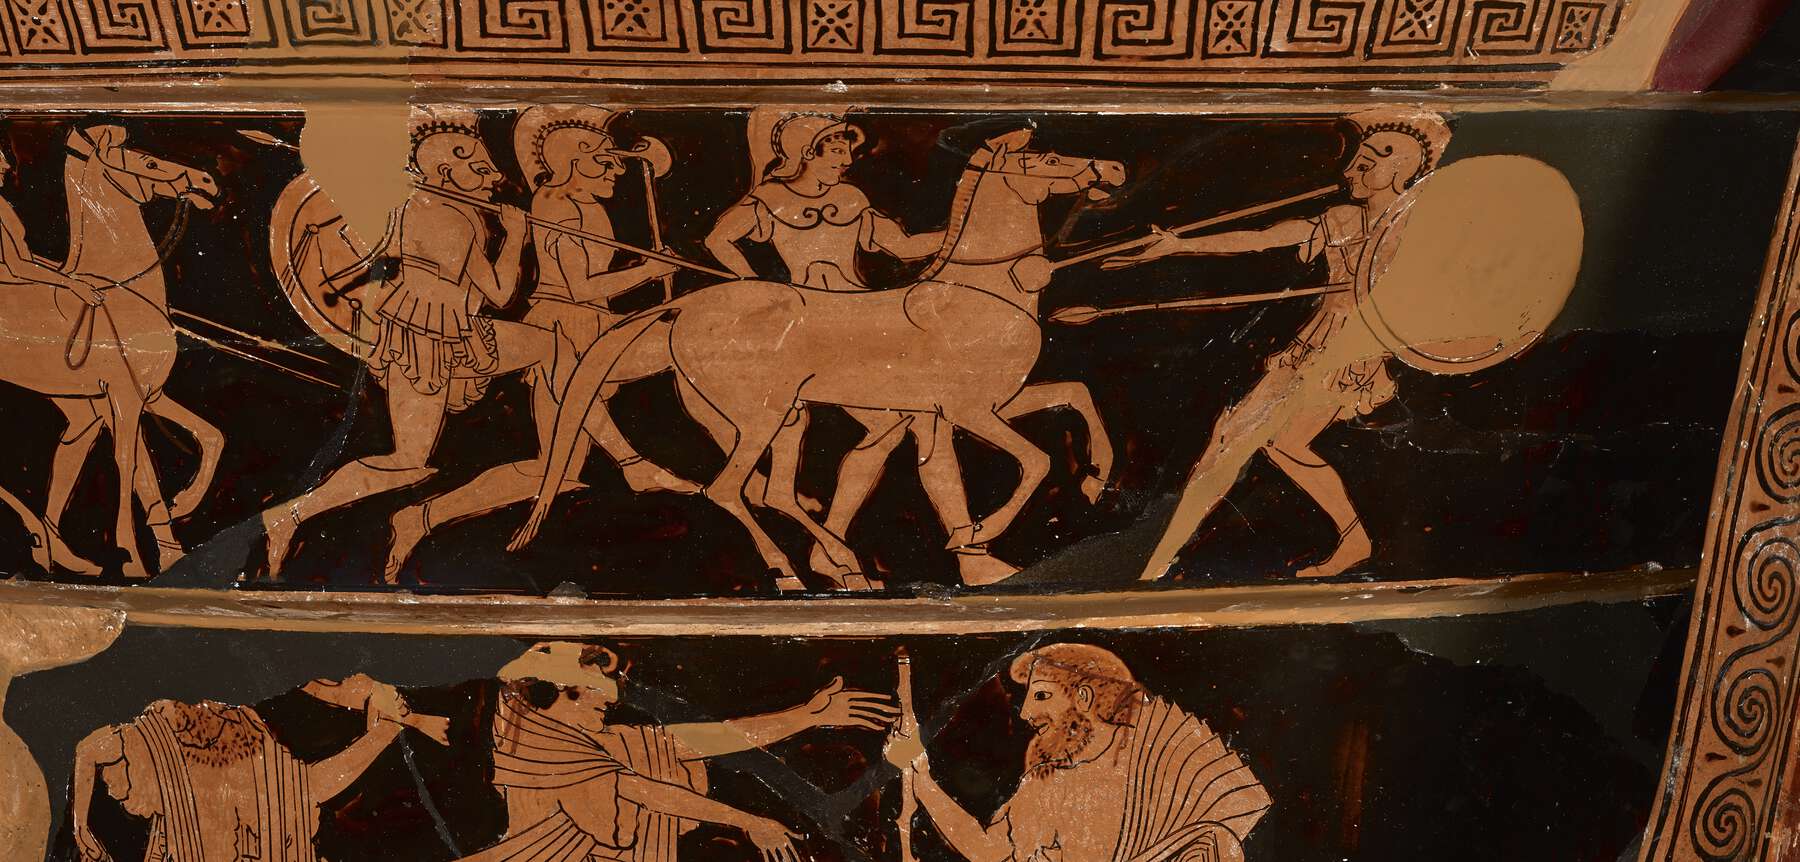 A detail of the neck, with people and horses chasing/attacking one person